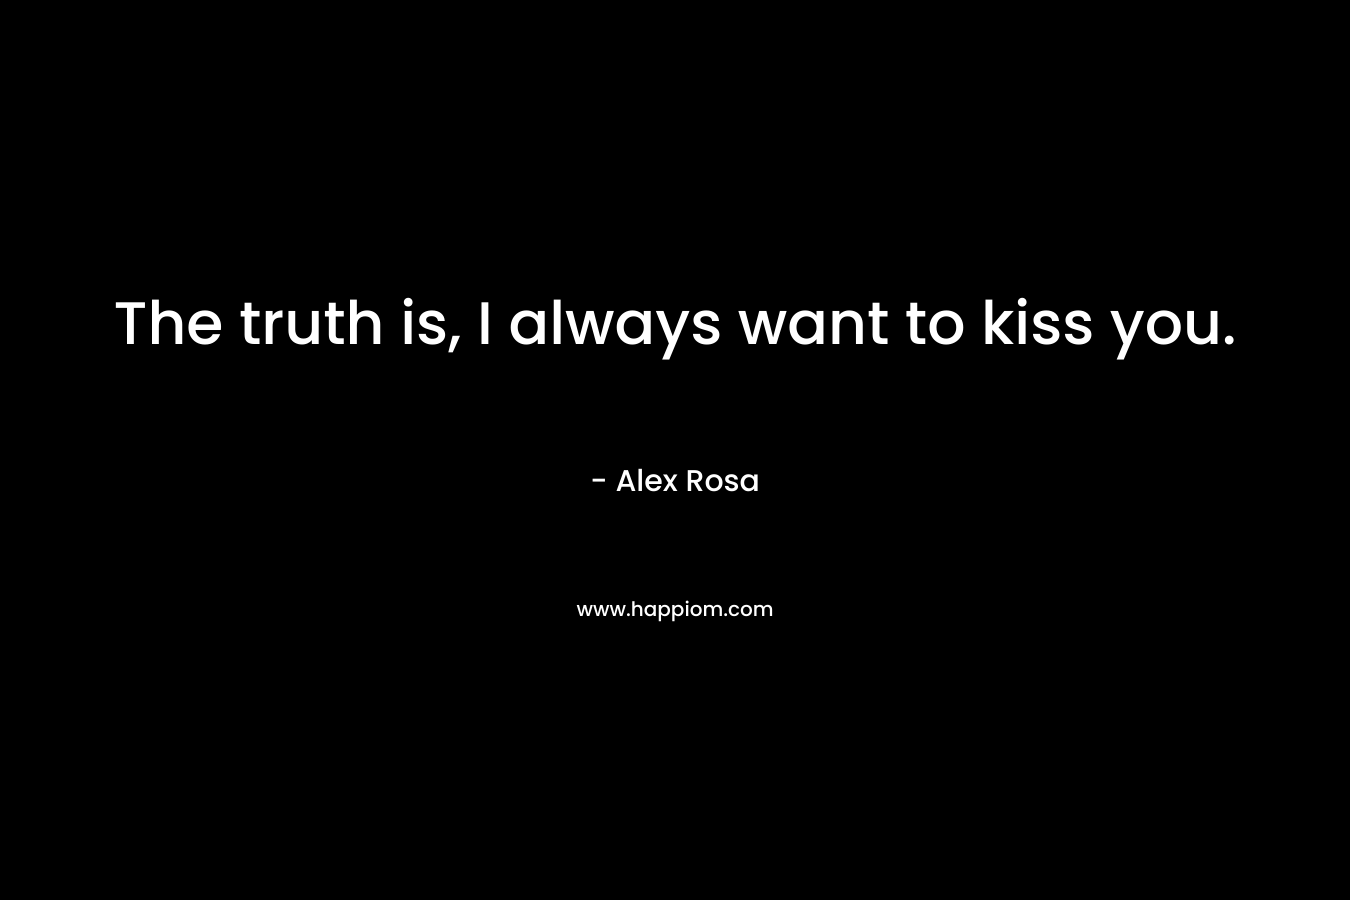 The truth is, I always want to kiss you.